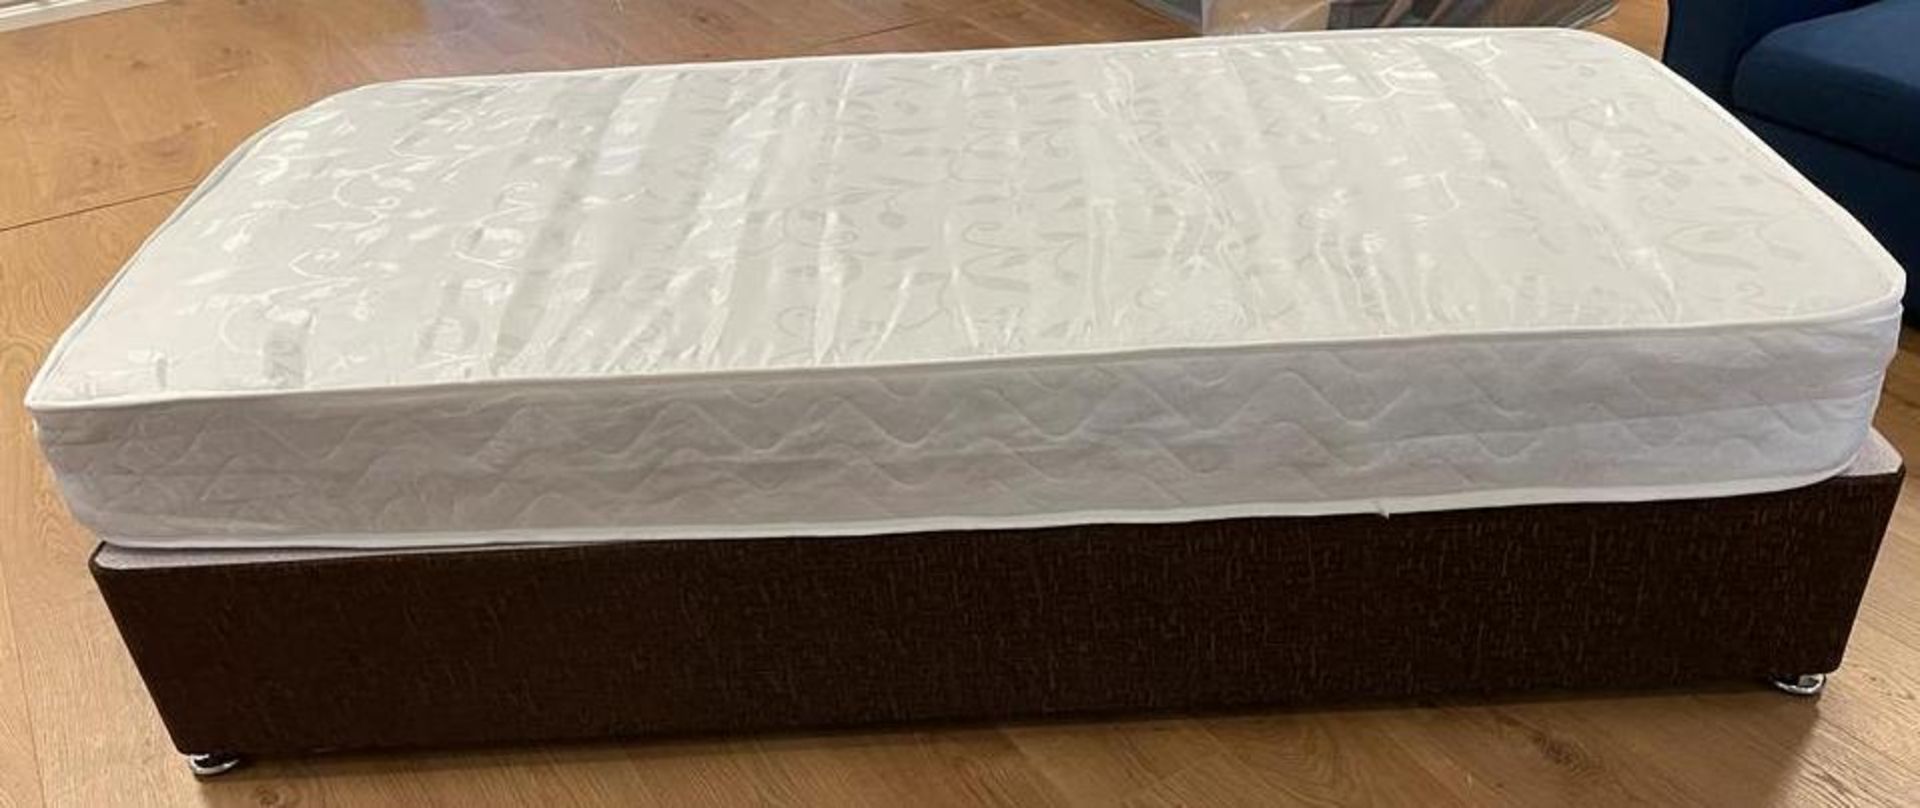 Brand New Trade Lot 10 X 3ft bed base in a light brown chenille with 800 pocket sprung Mattress.